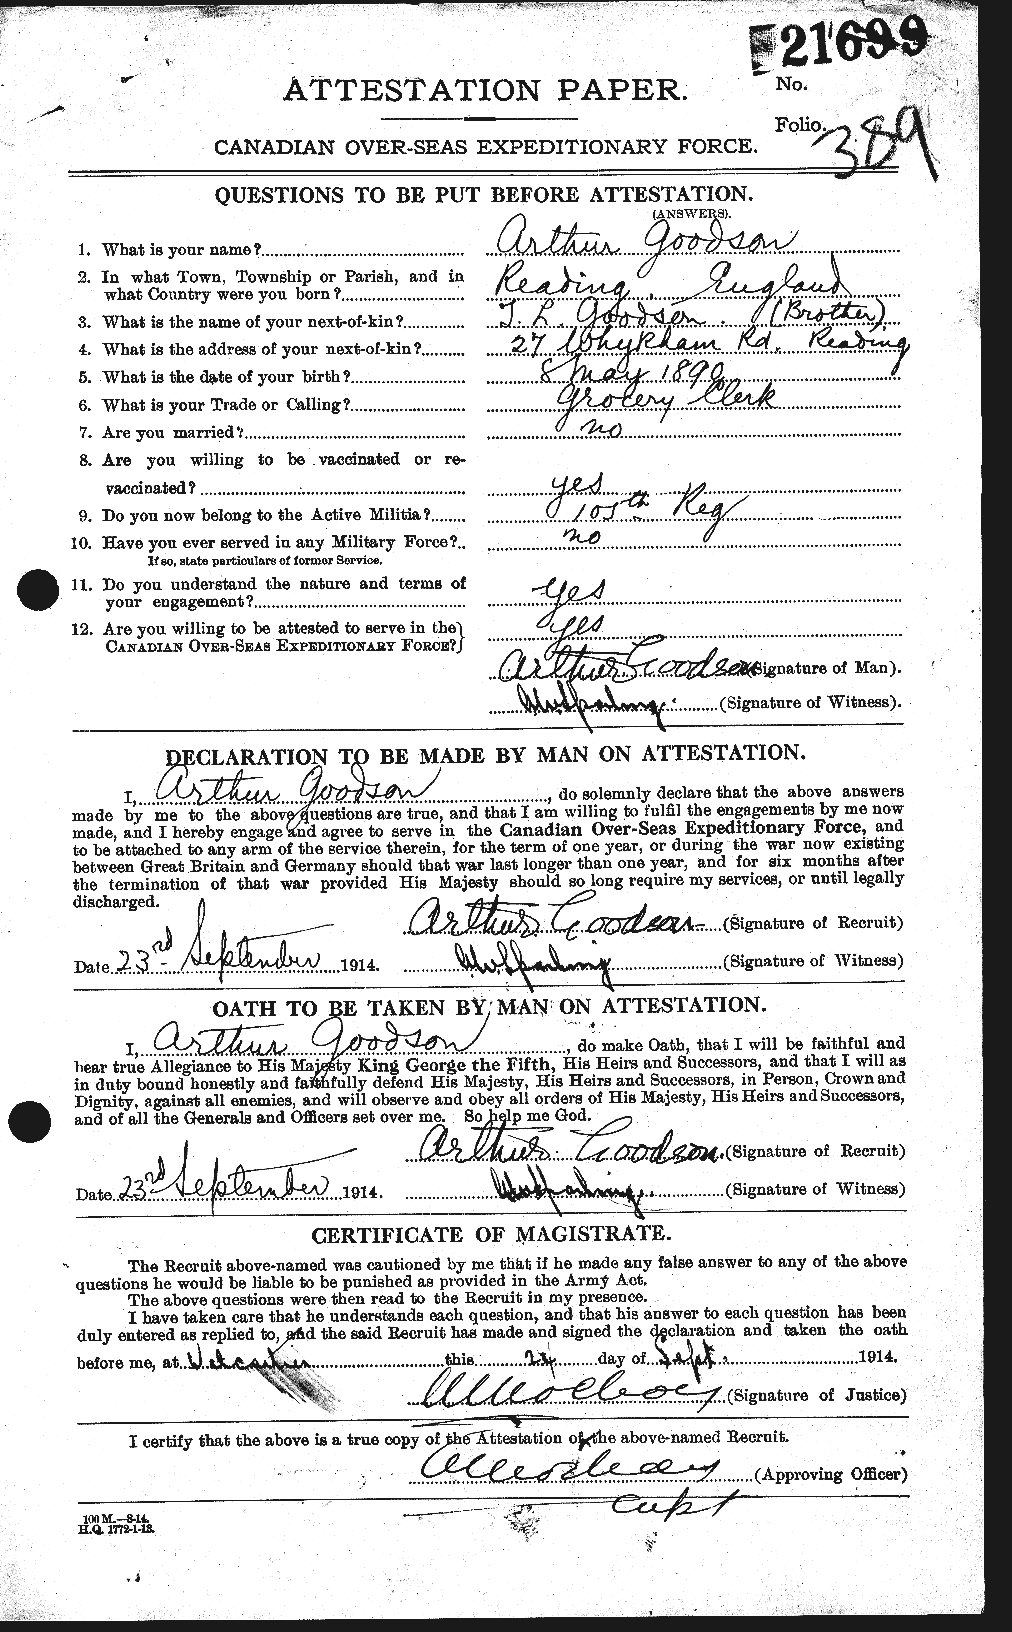 Personnel Records of the First World War - CEF 357879a